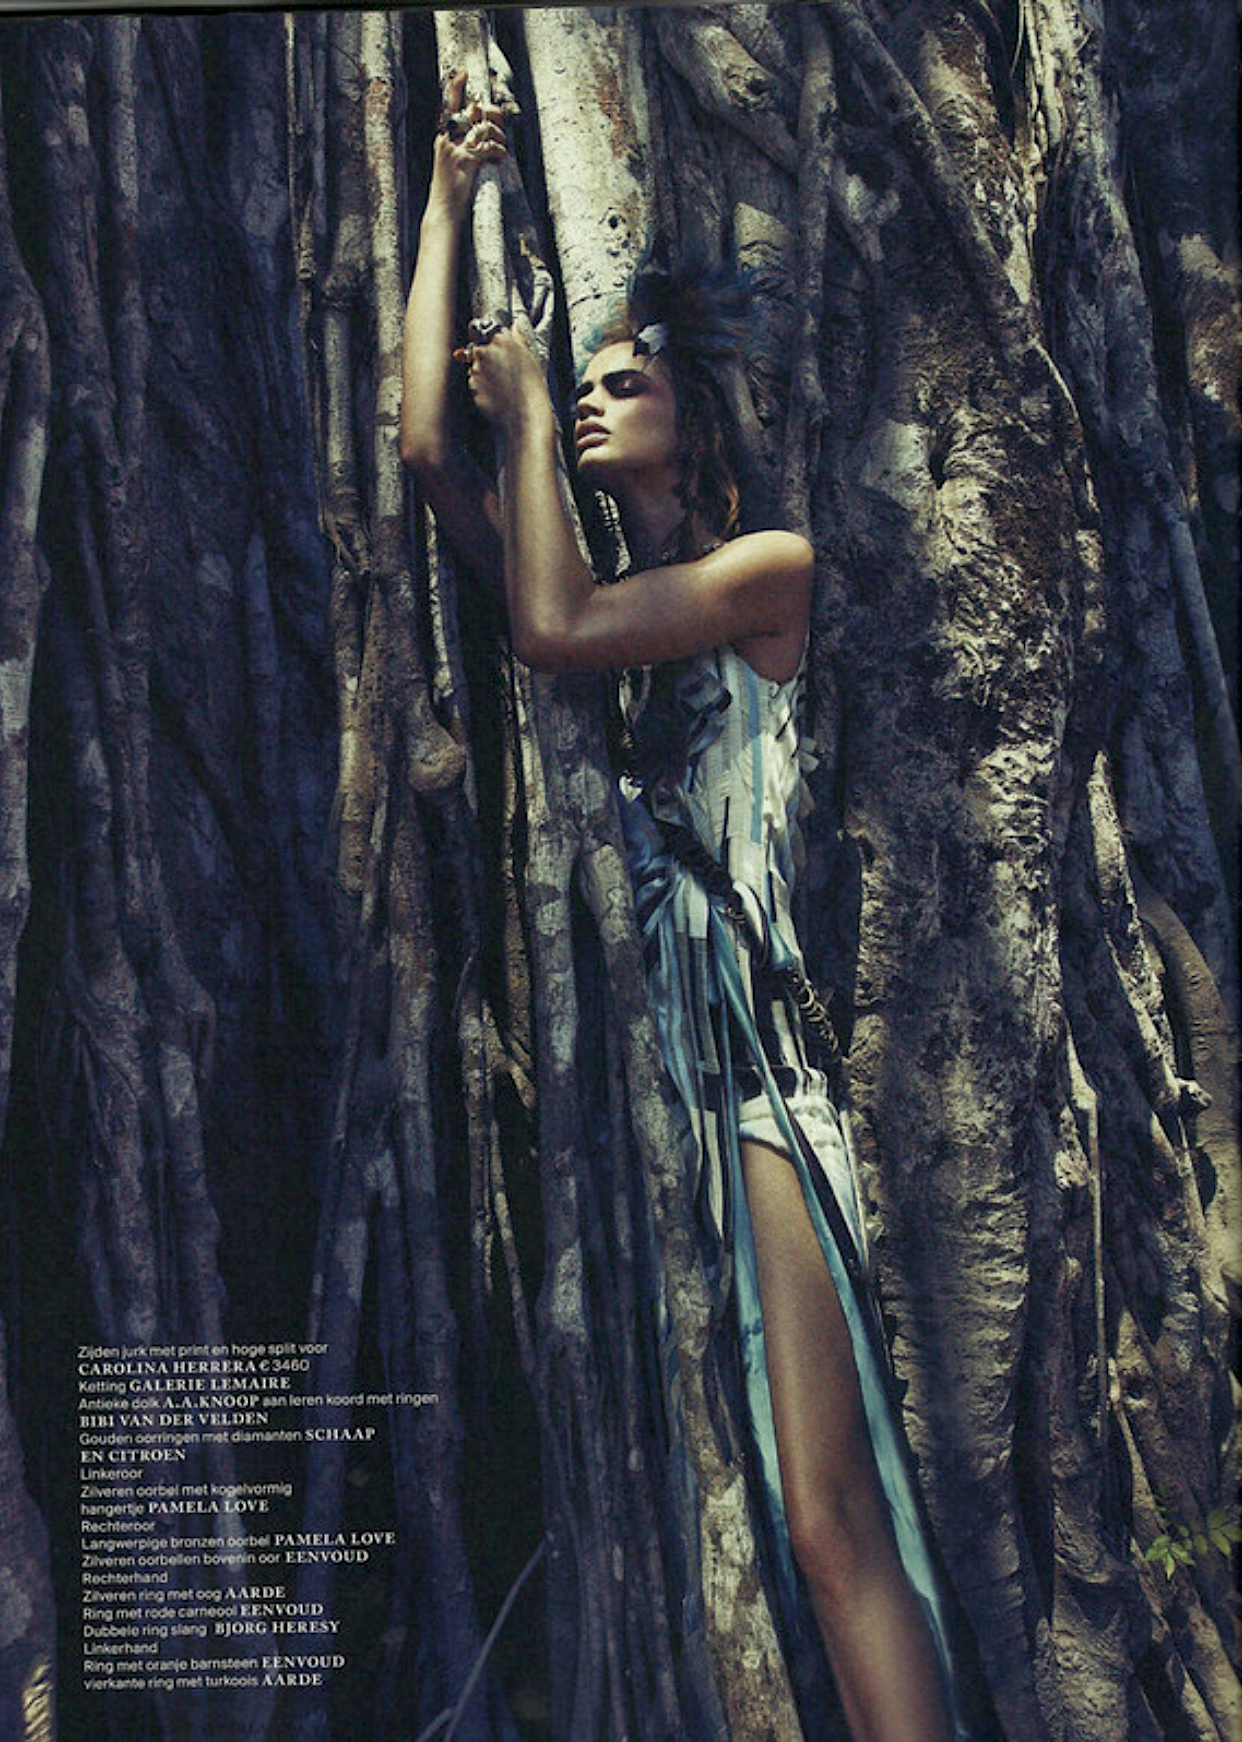 Rianne-Ten-Haken-by-Petrovsky-Ramone-for-Vogue-Netherlands-May-2012-9.png